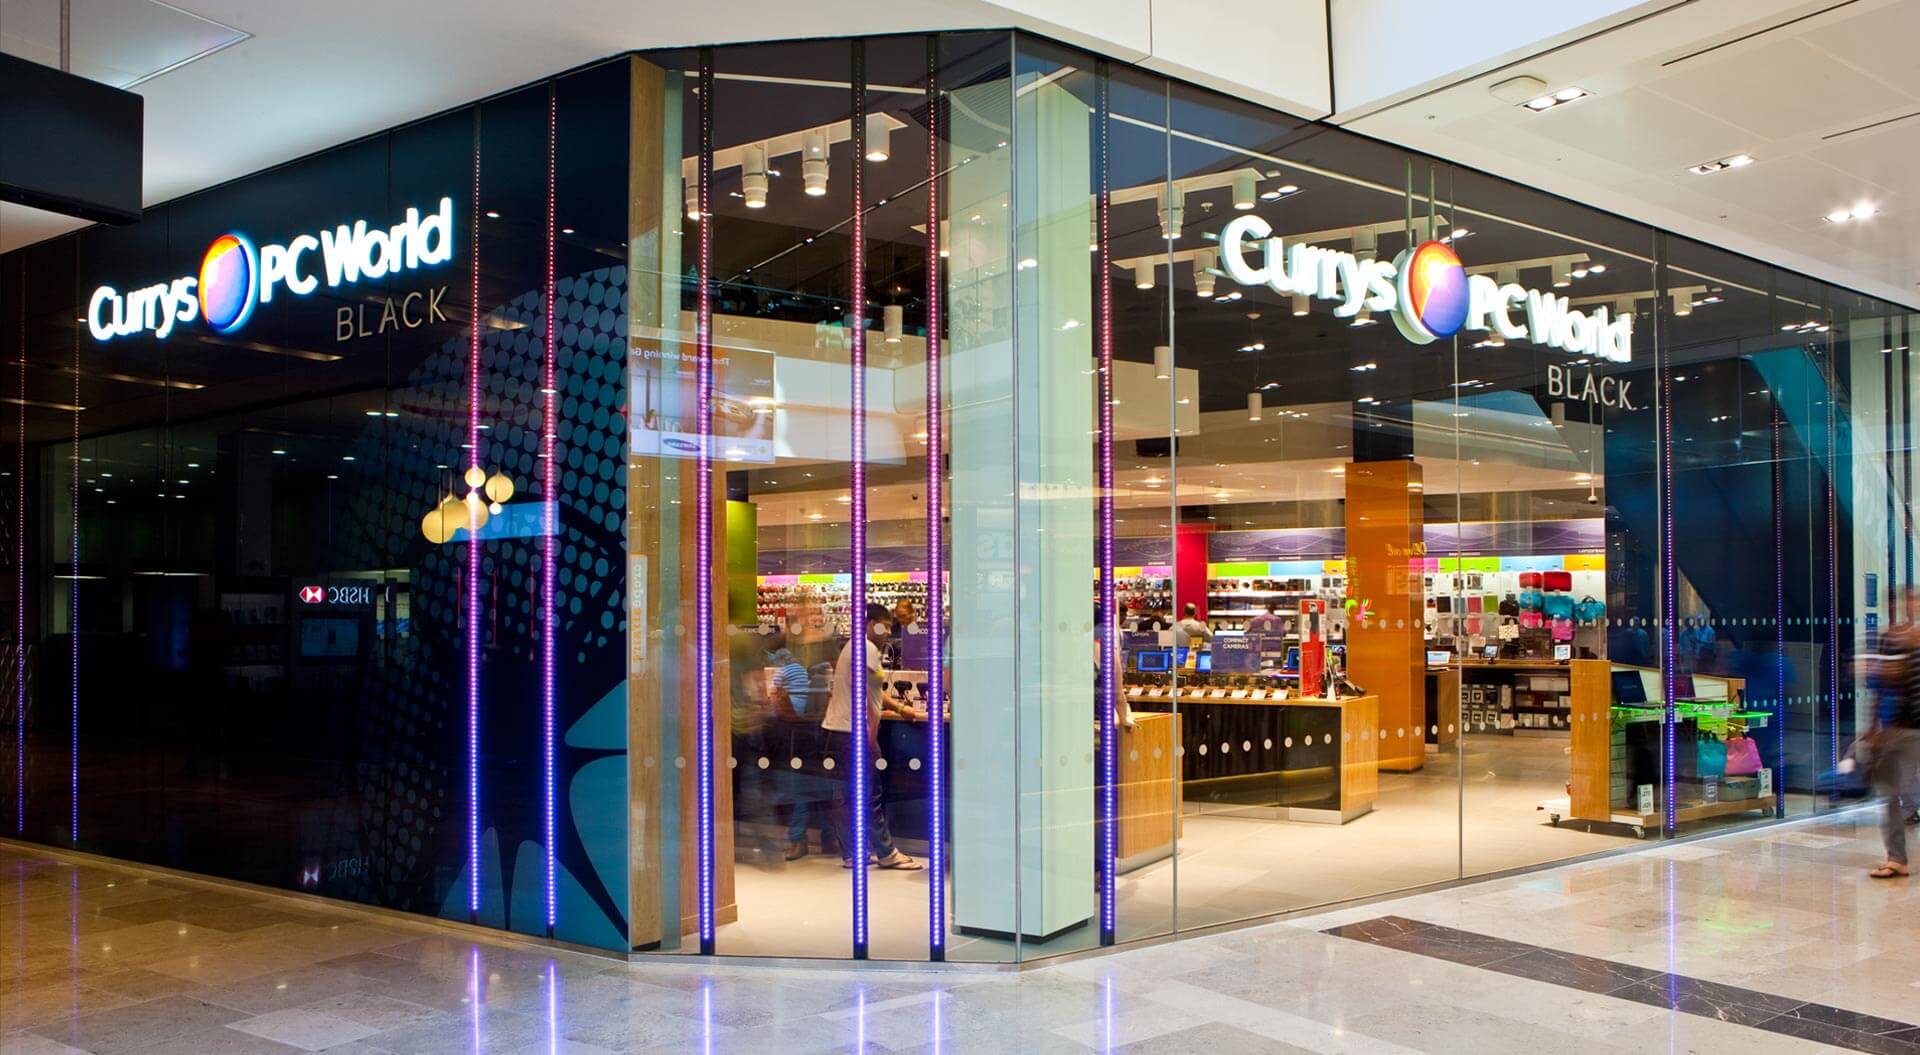 Currys PC World Black brand identity and store shop front